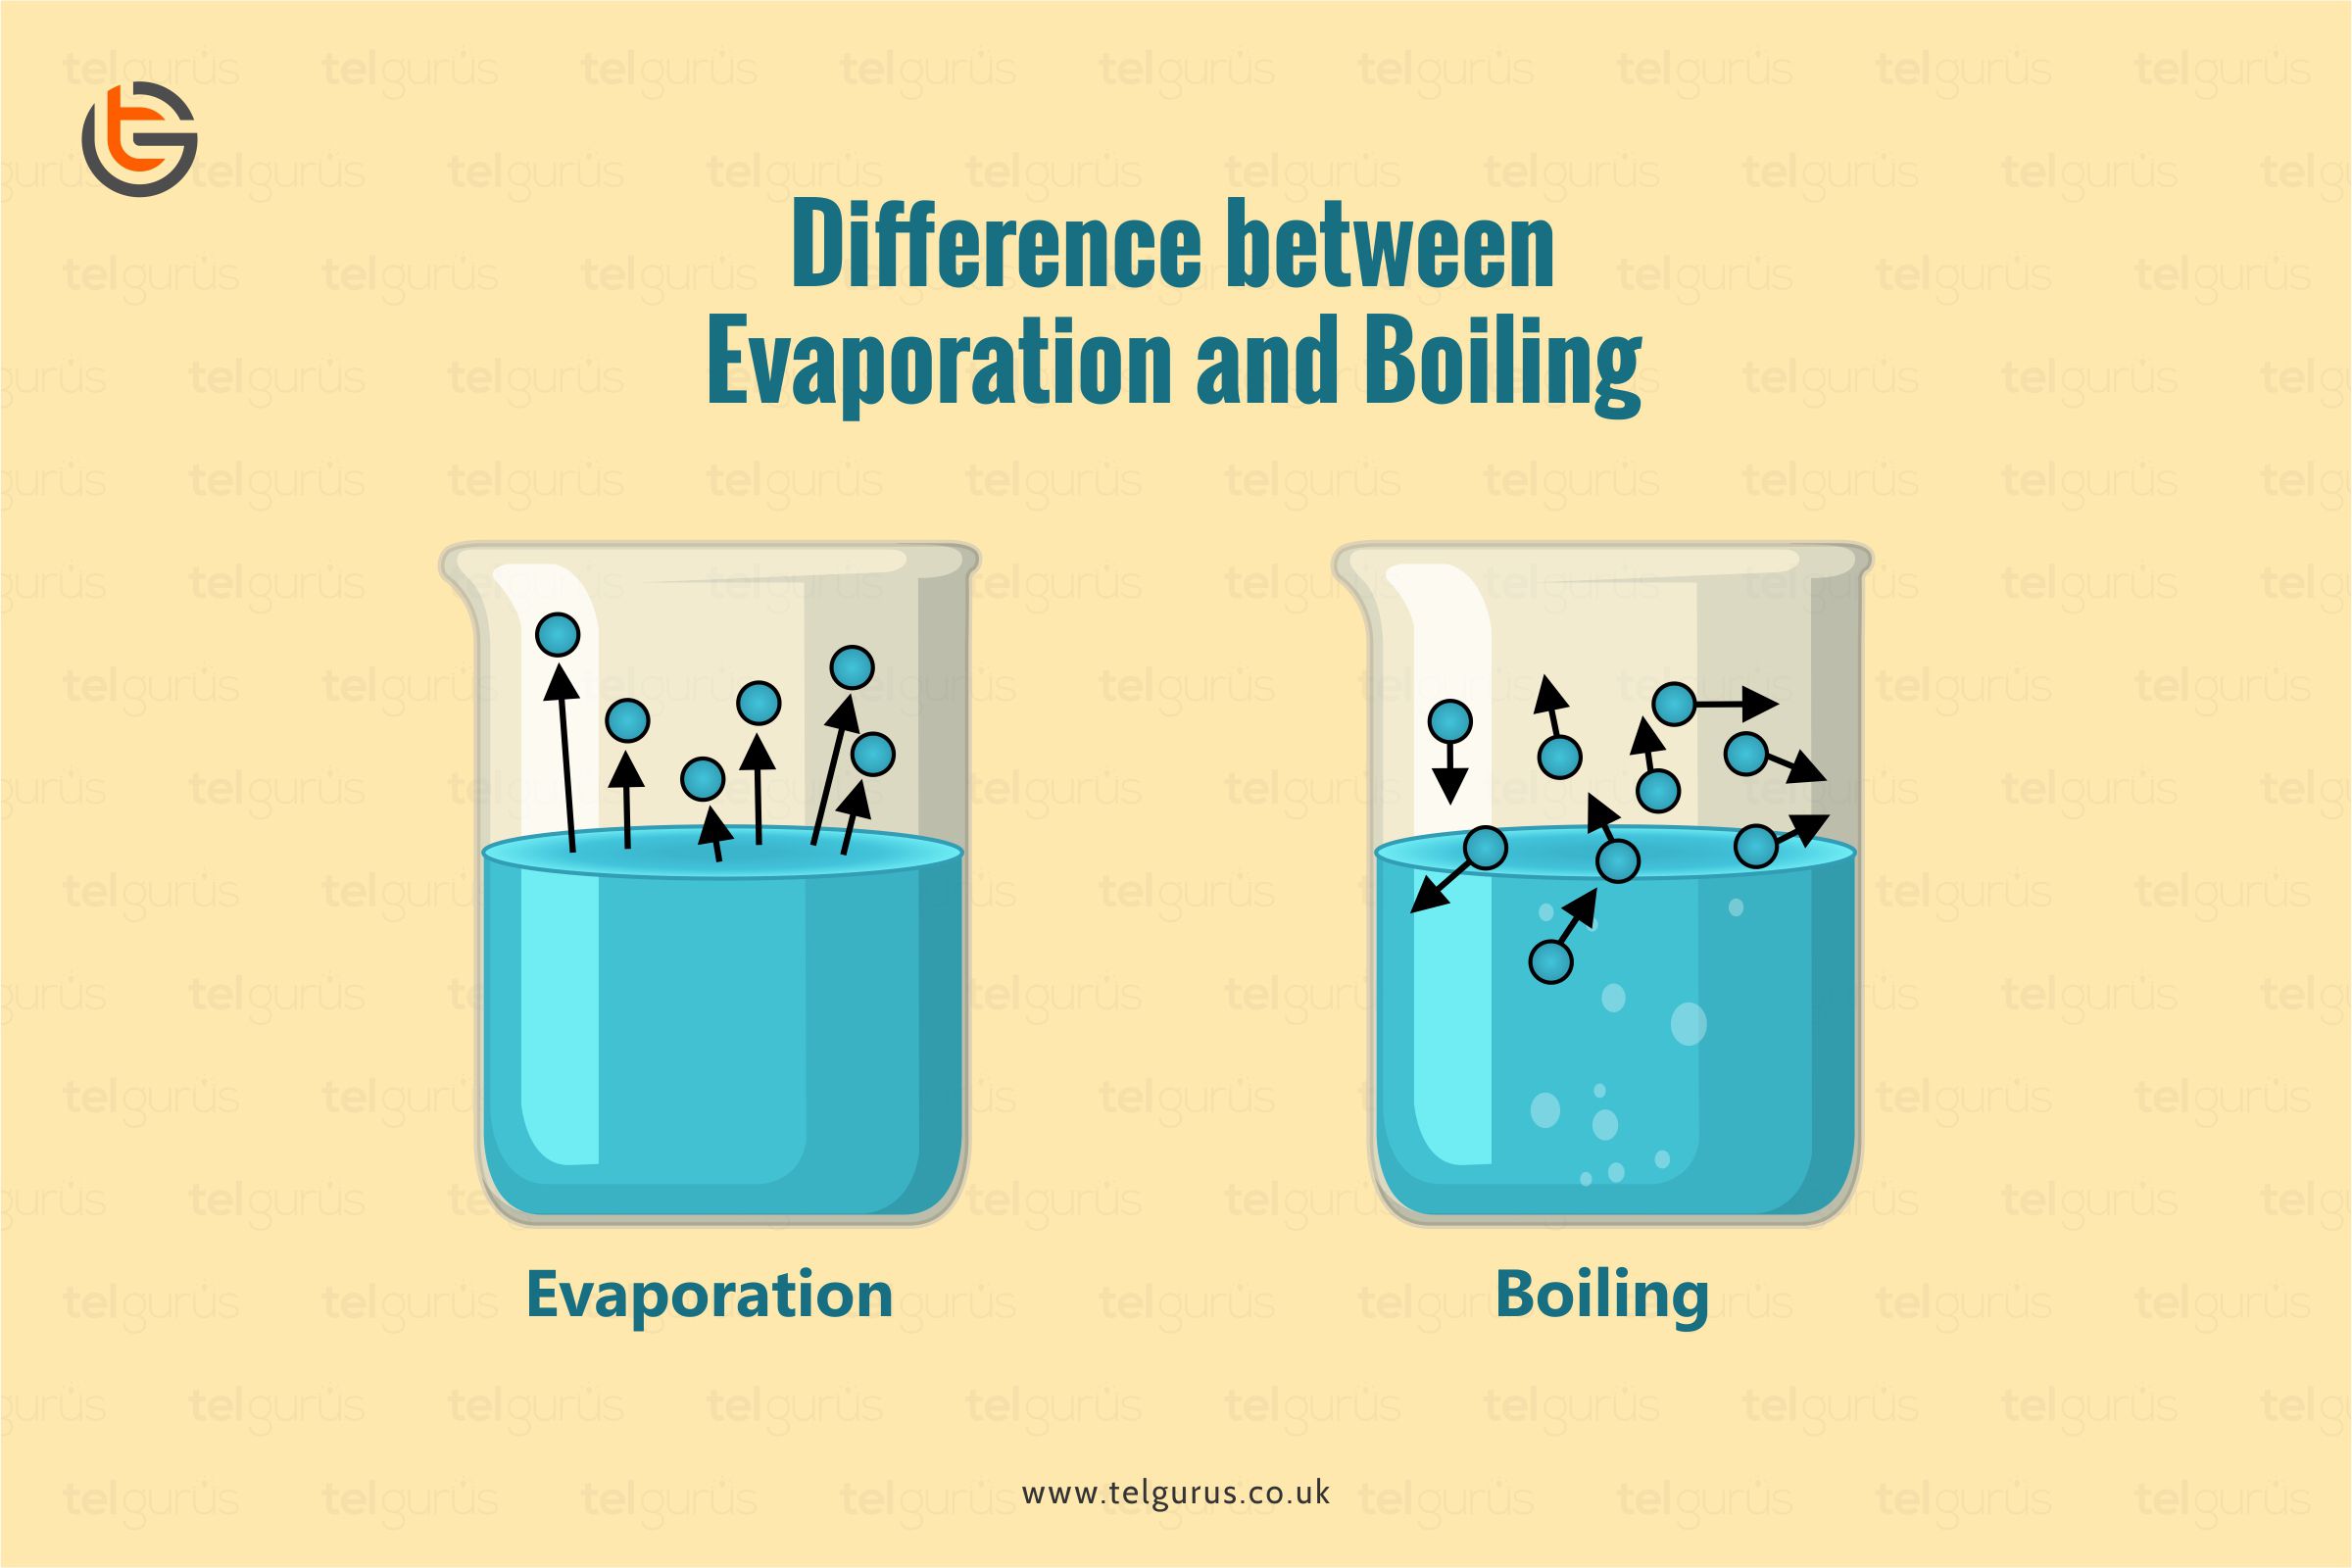 Evaporation and Boiling